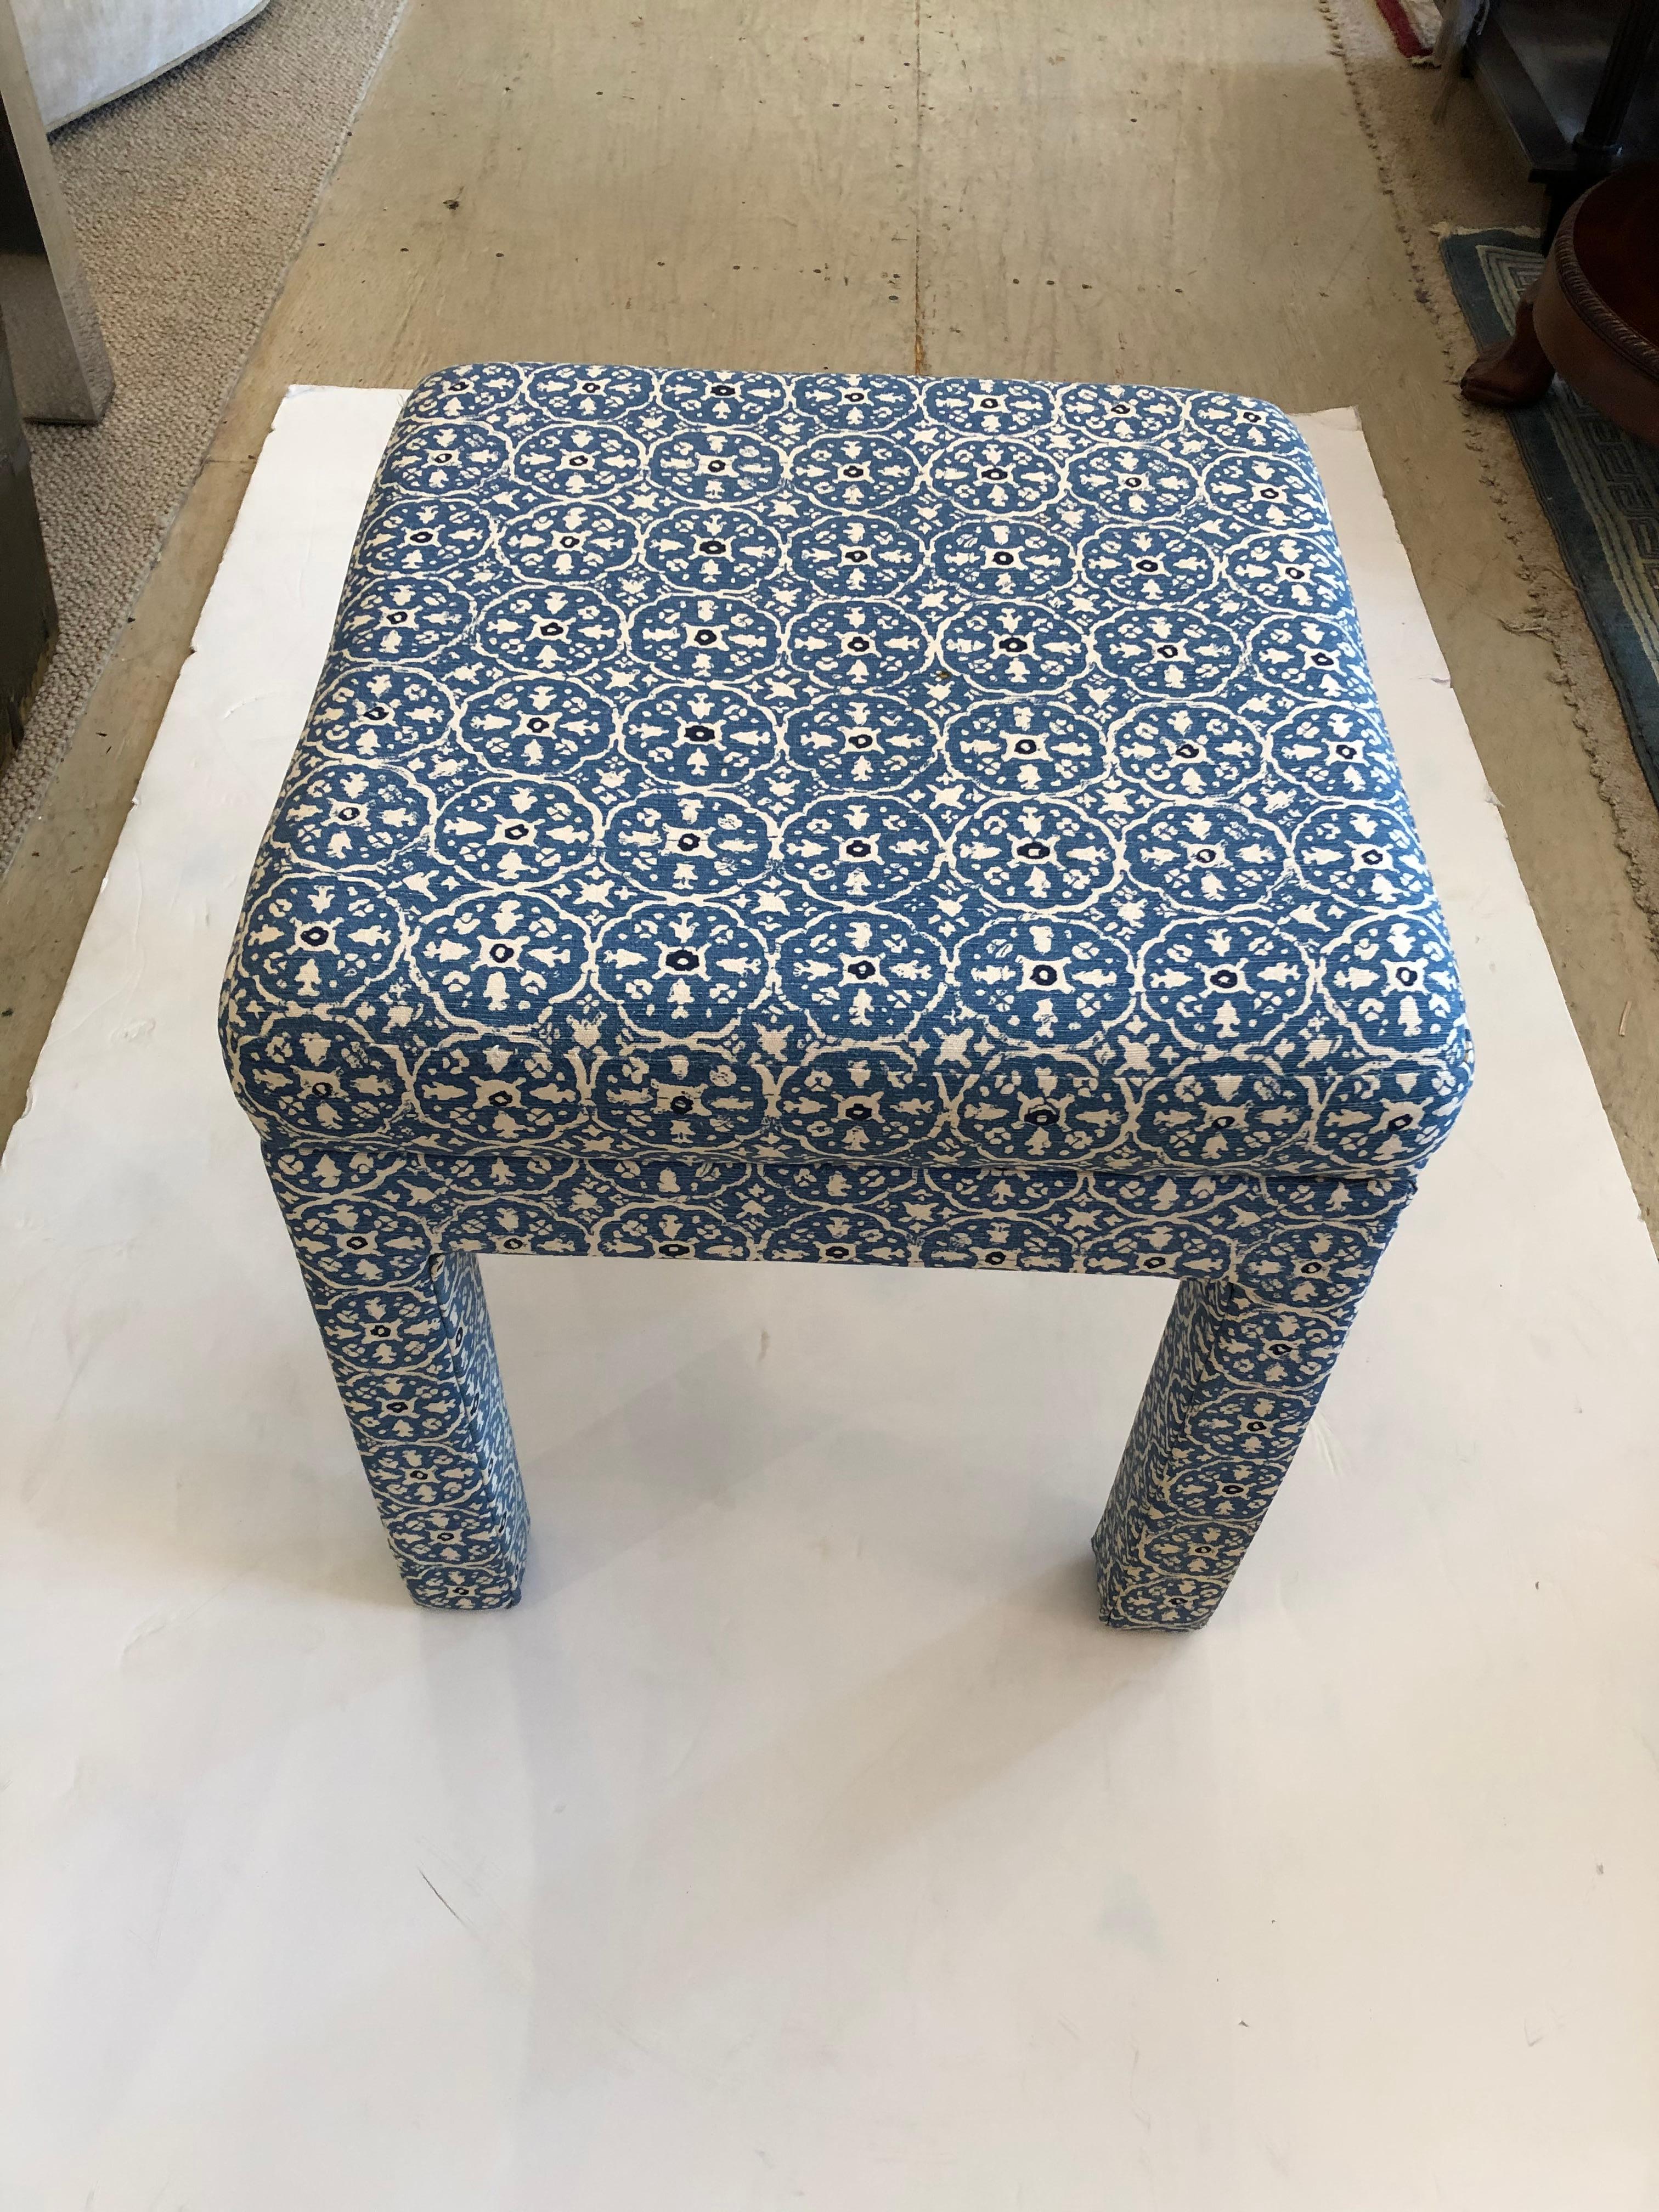 A great looking square parsons style ottoman upholstered in what looks like stunning blue and white quadrille linen.  Fabric is China Seas Nitik II in Blue/FloresBlue